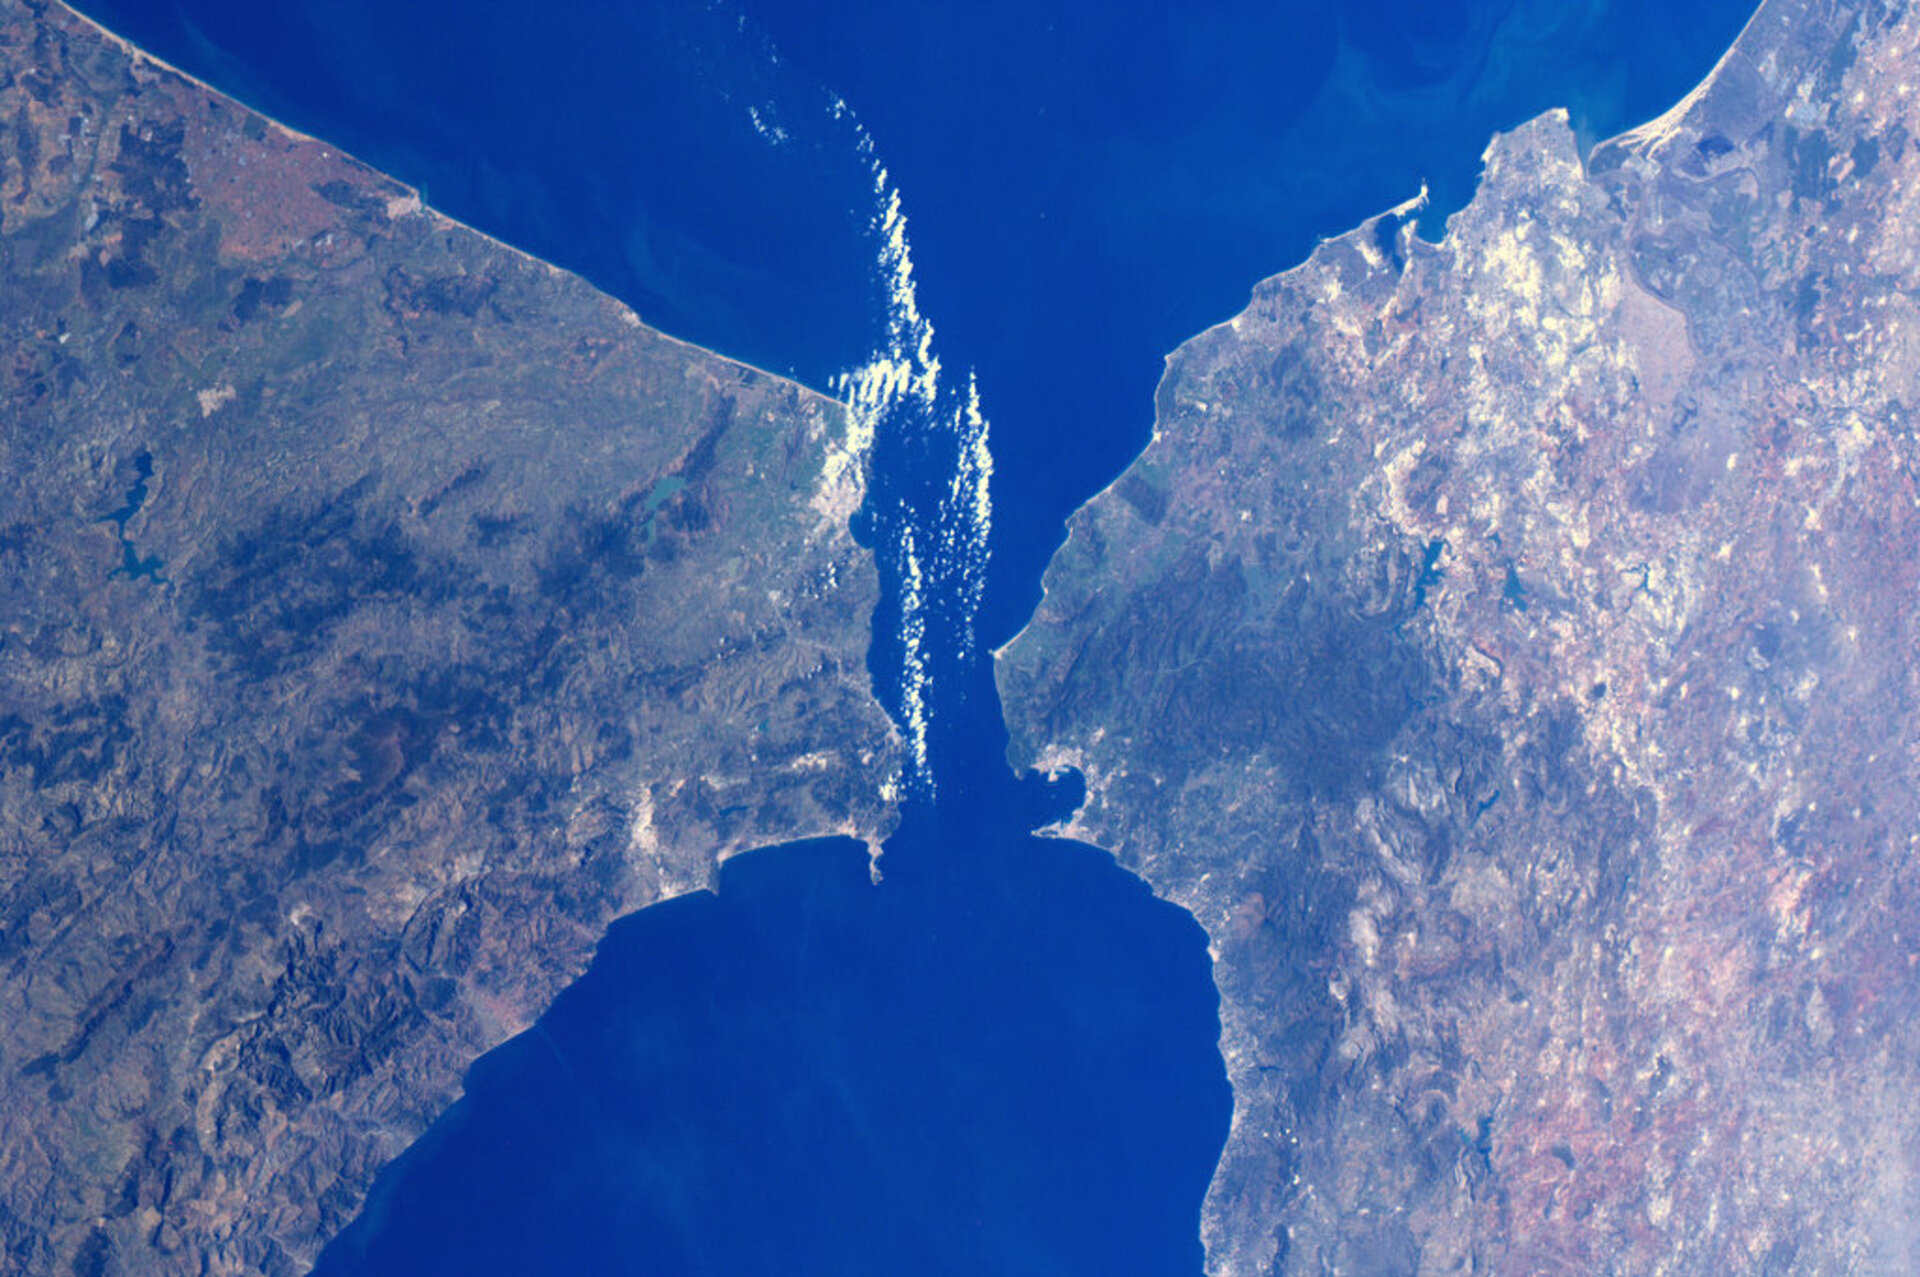 The Strait of Gibraltar, as seen from the ISS